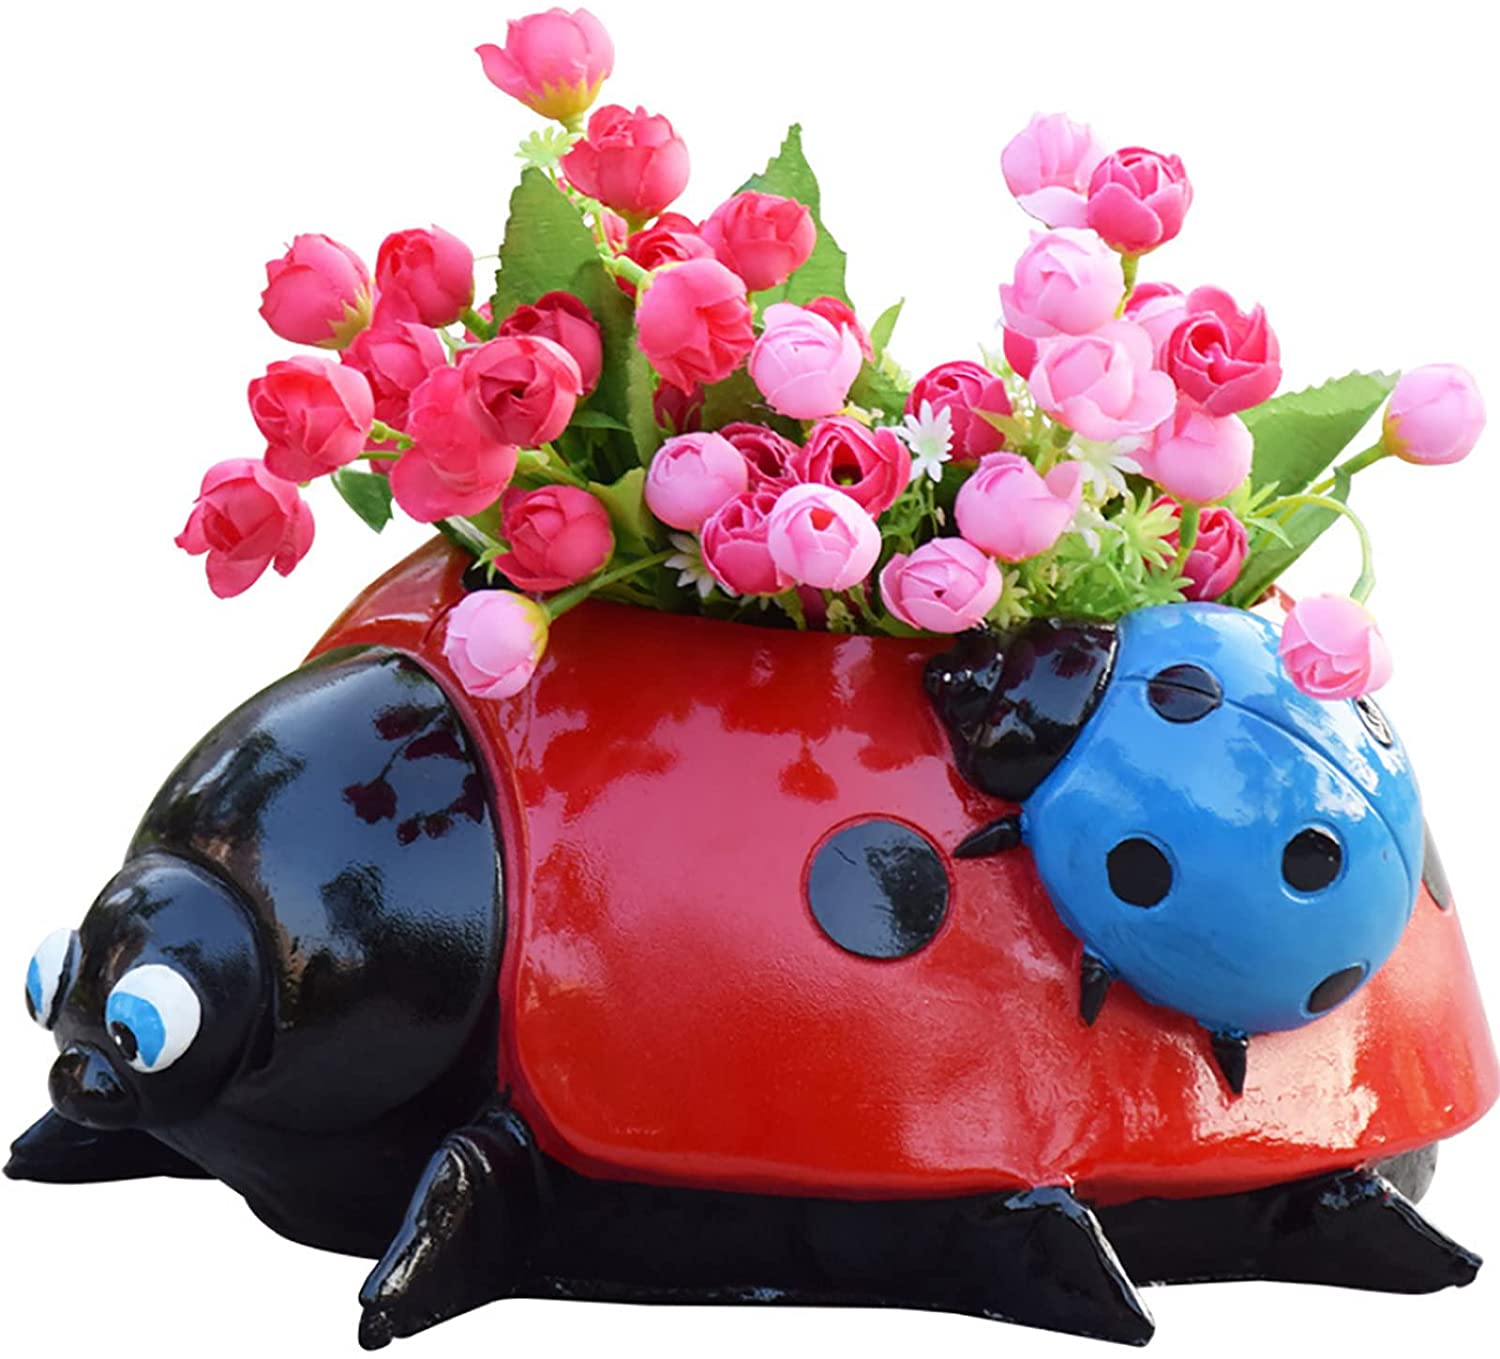 Resin Ladybugs Flower Pot Garden Decorations, Simulation Animal Ladybugs Flower Pot,Outdoor and Garden Decor Patio Yard Planter Flower Pot Indoor or Outdoor Decorations (Red) - image 2 of 7